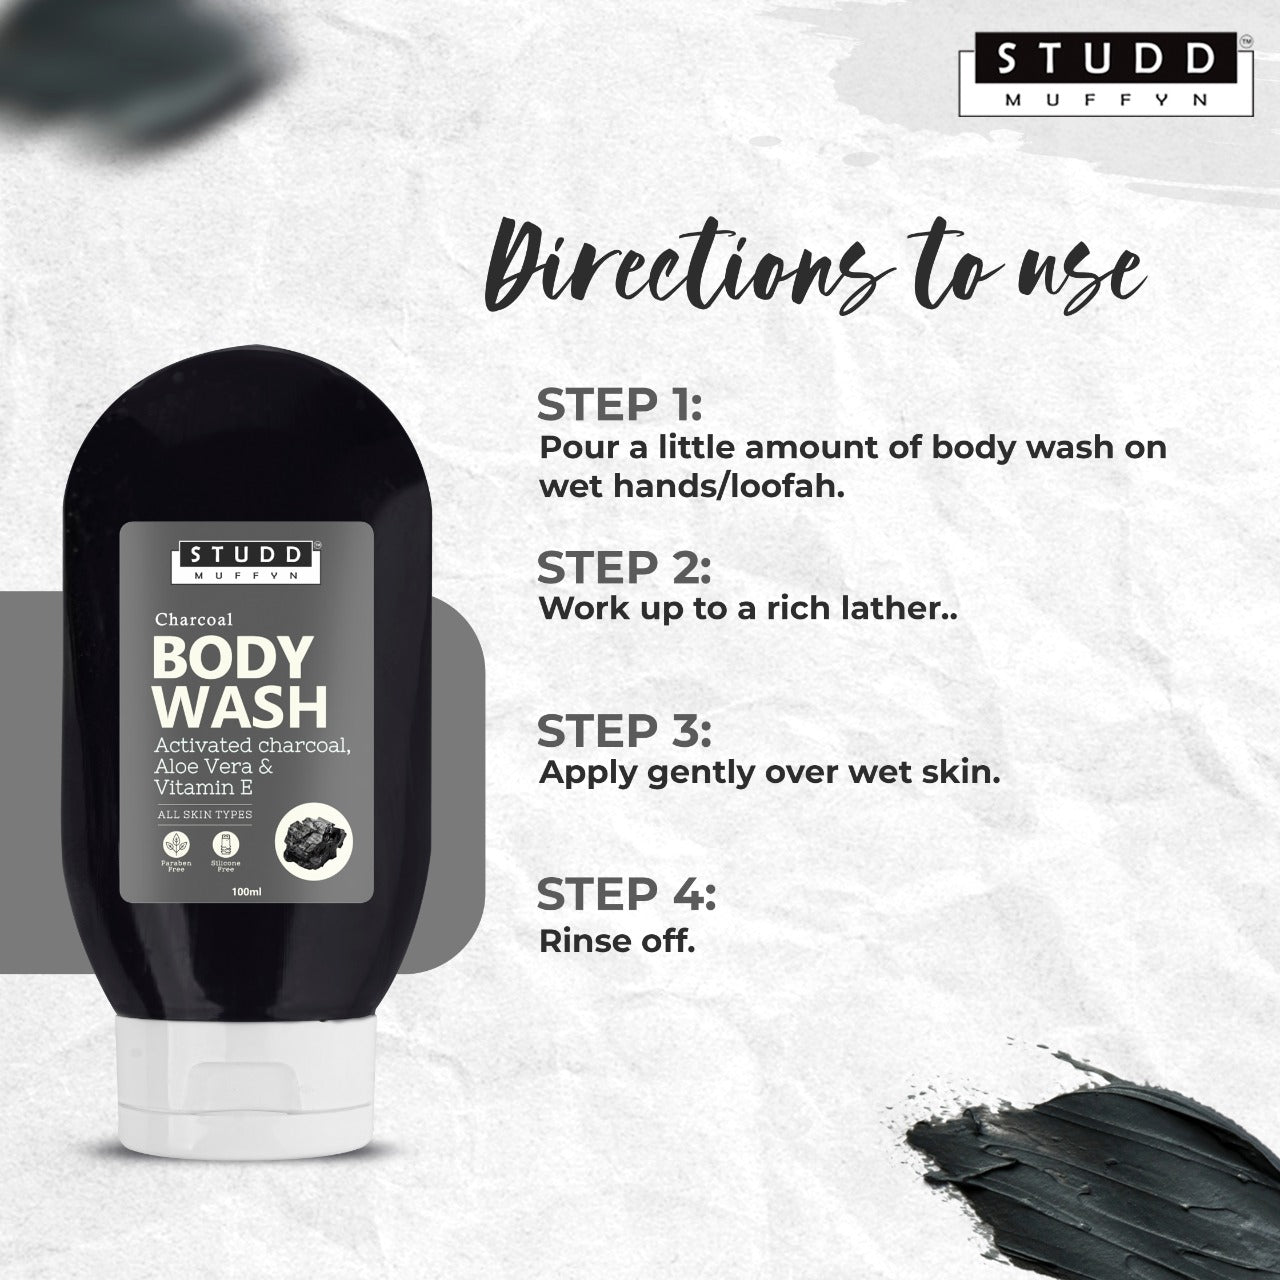 Studd Muffyn Charcoal Body Wash with Activated Charcoal, Aloe Vera & Vitamin-E for Men and Women- 100ml